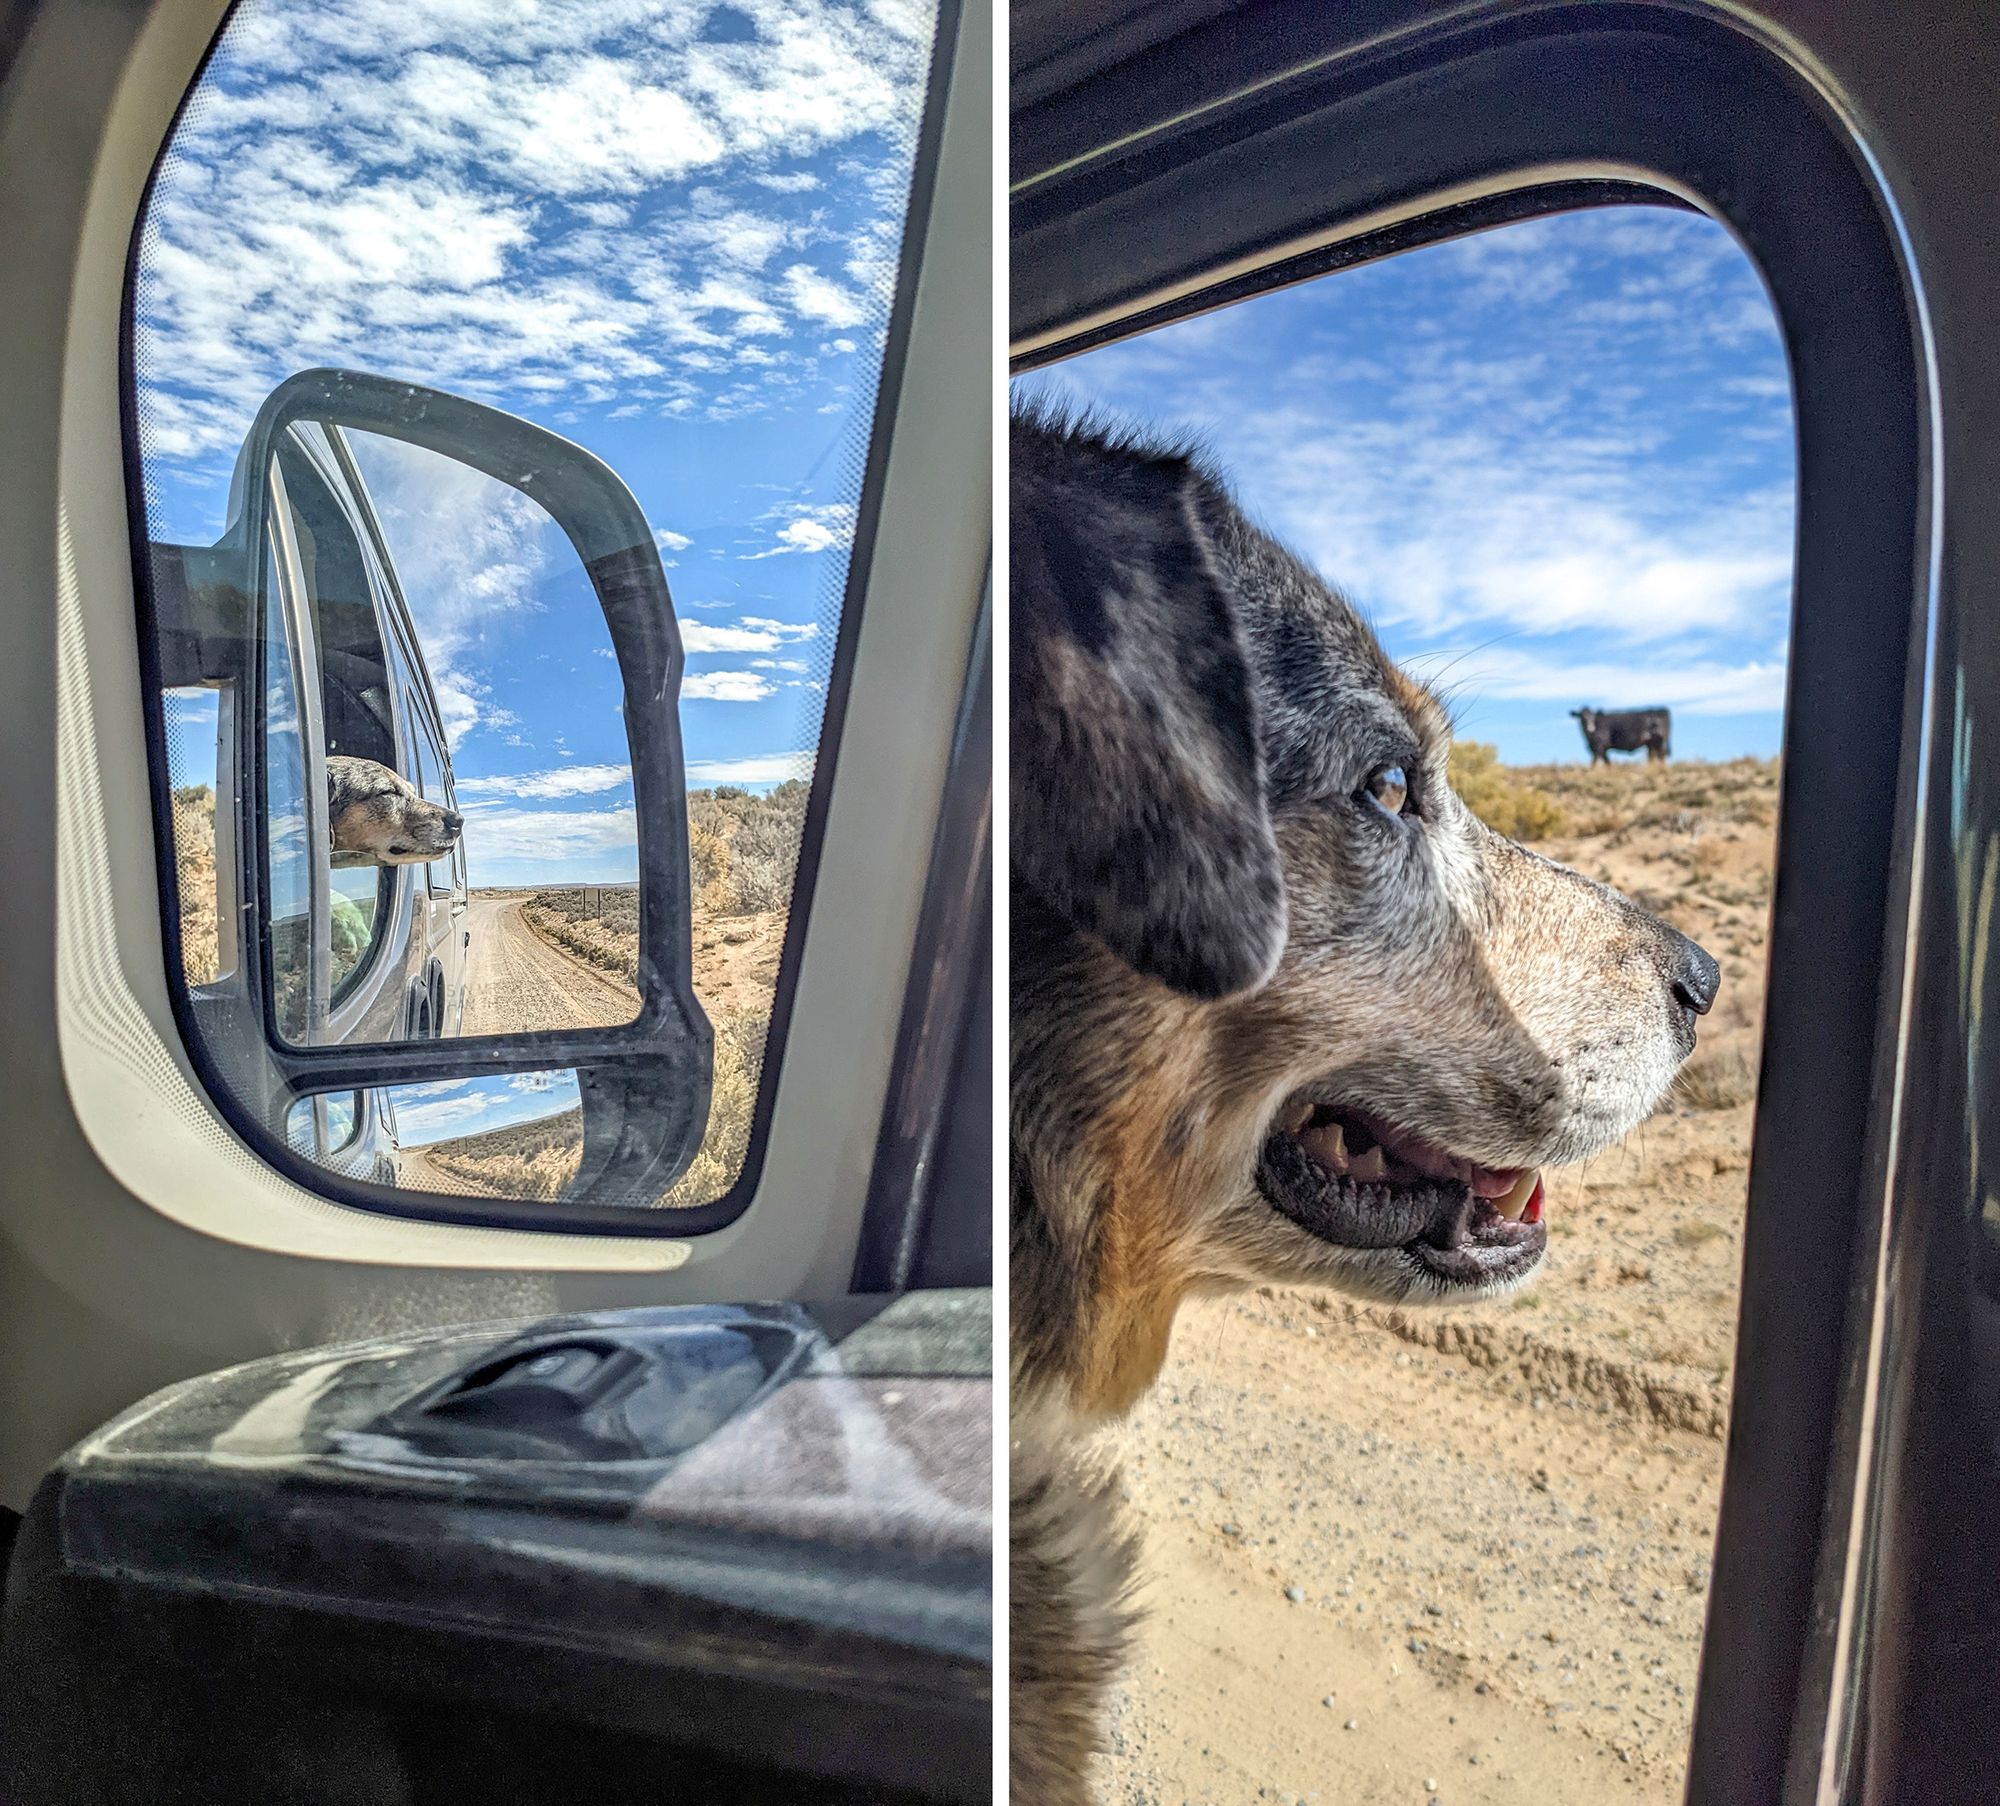 Visiting Chaco Canyon with Dogs